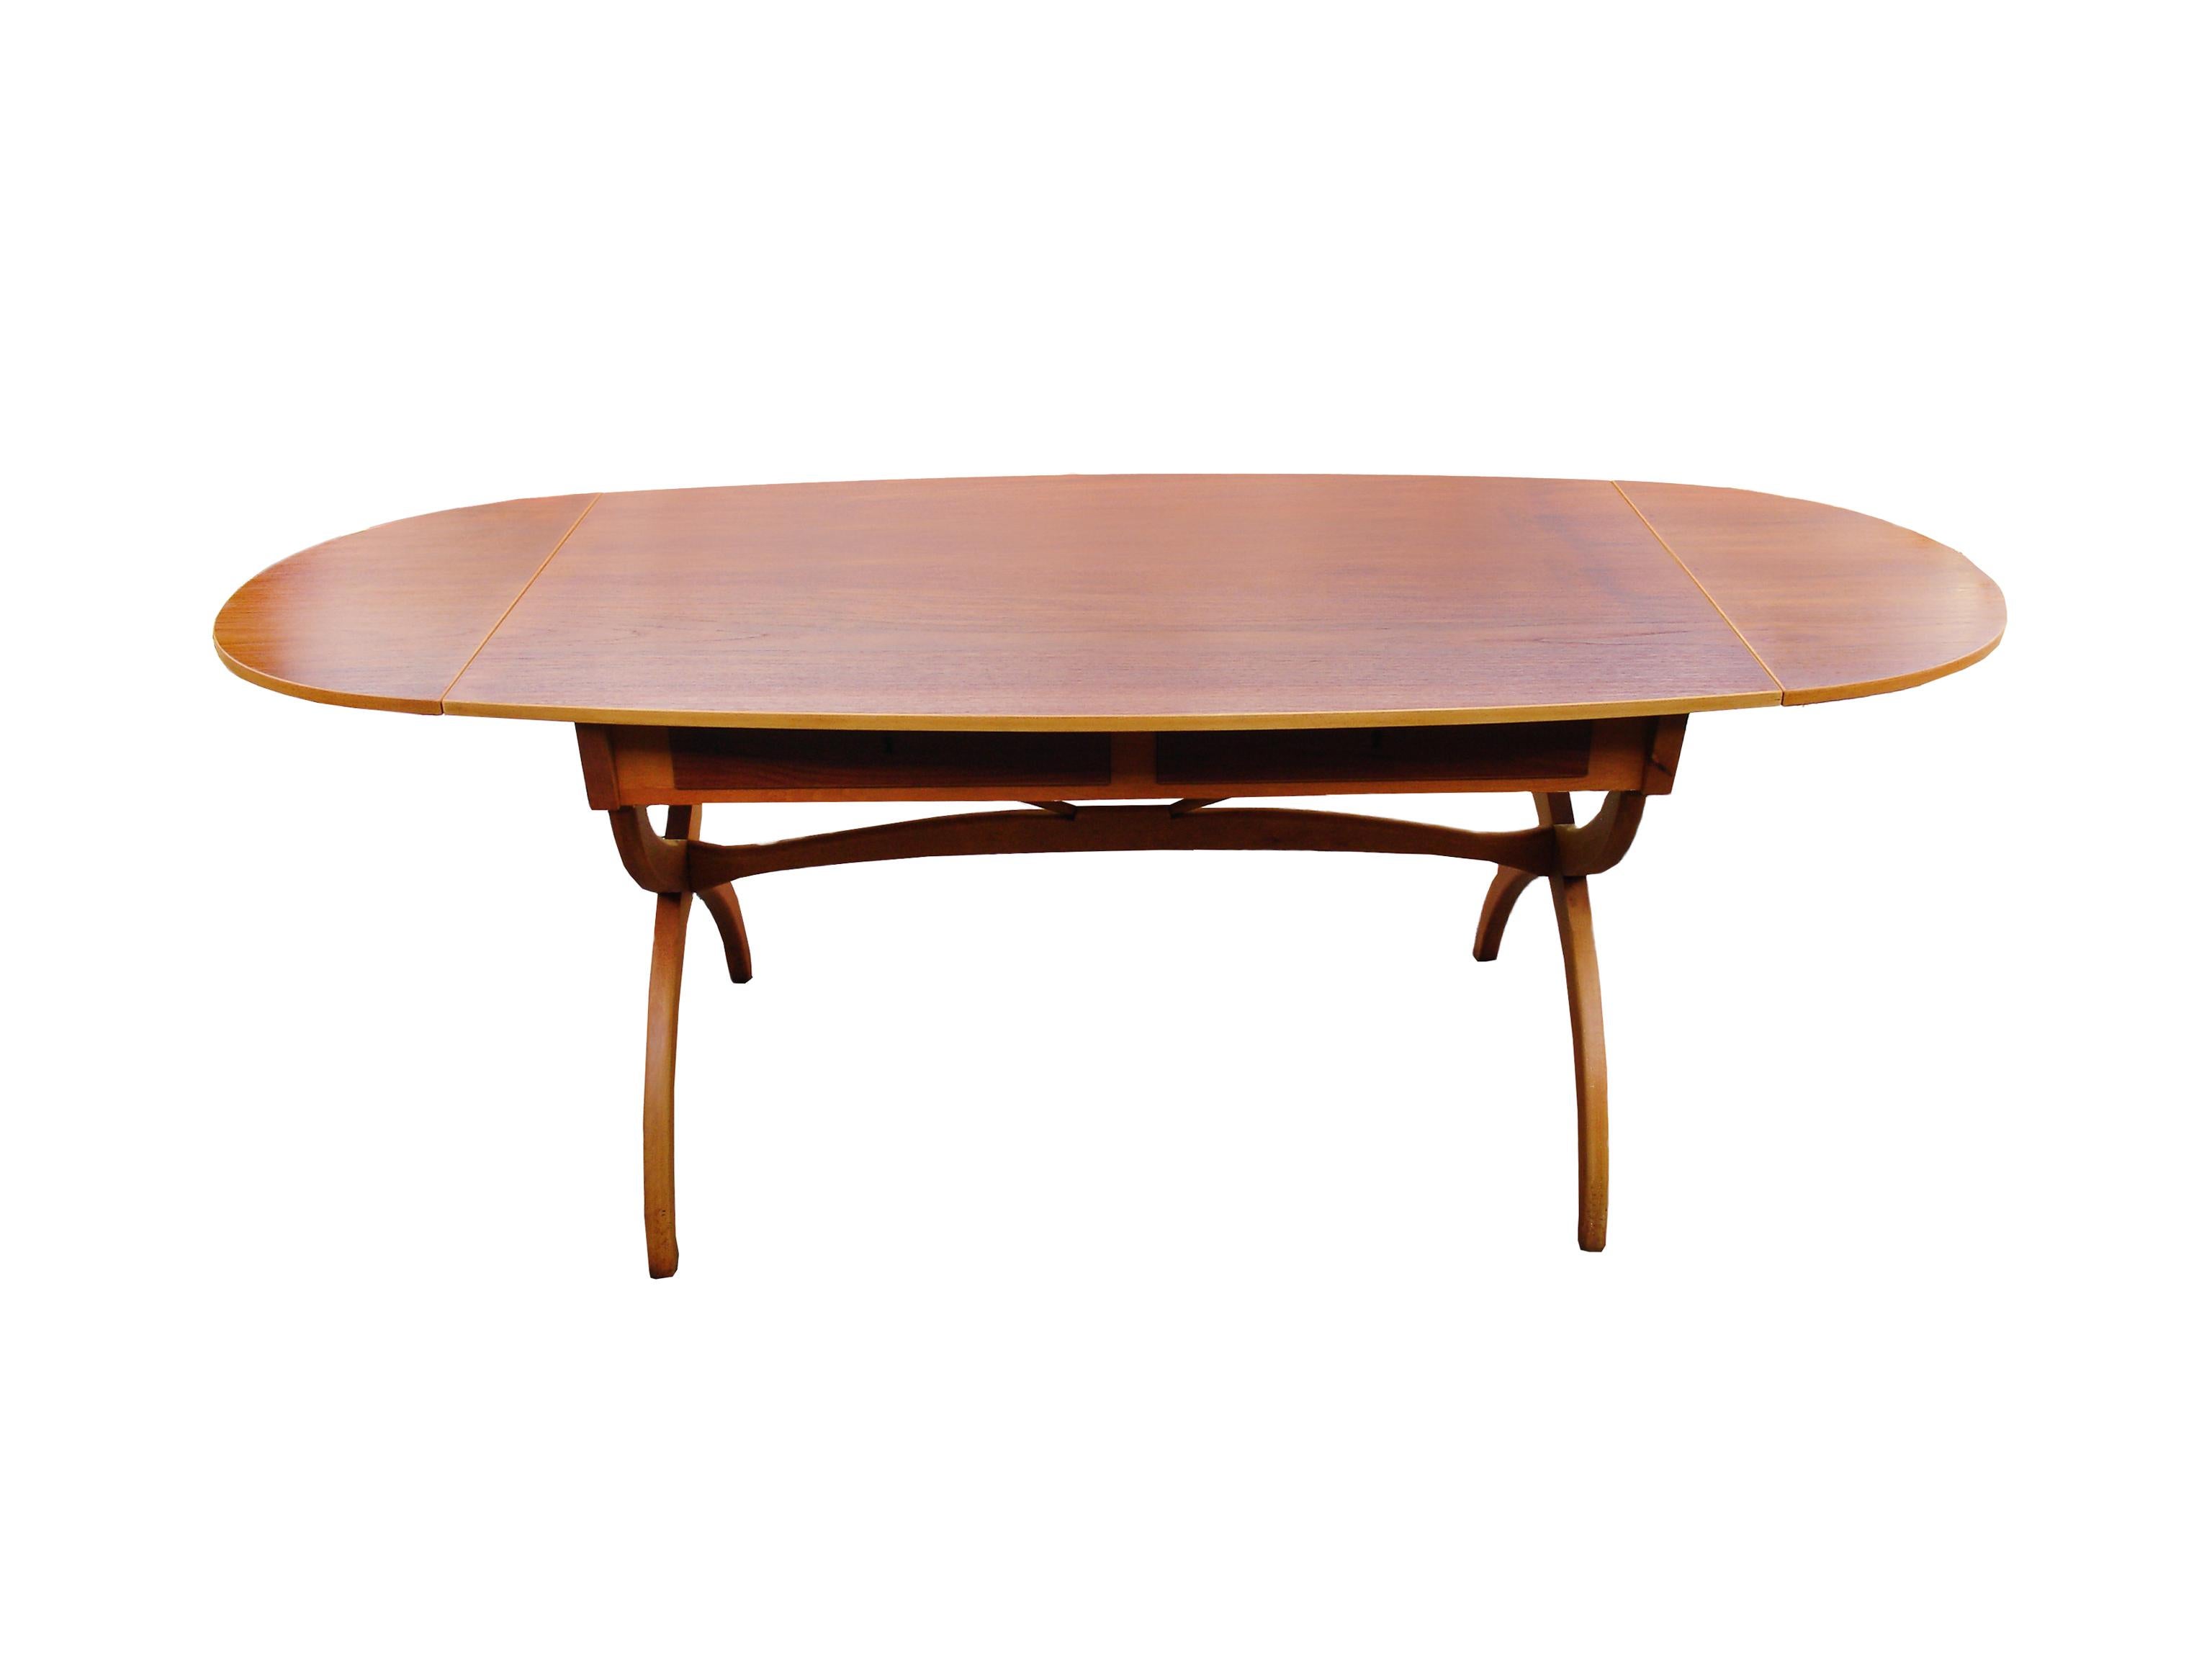 Danish Modernism free-standing office desk or dining table by Borge Morgensen, made of fined teak top and beech frame, fitted with drop-leaves on each side, front with two drawers including original keys.
Desk features two 38 cm drop-leaf; table